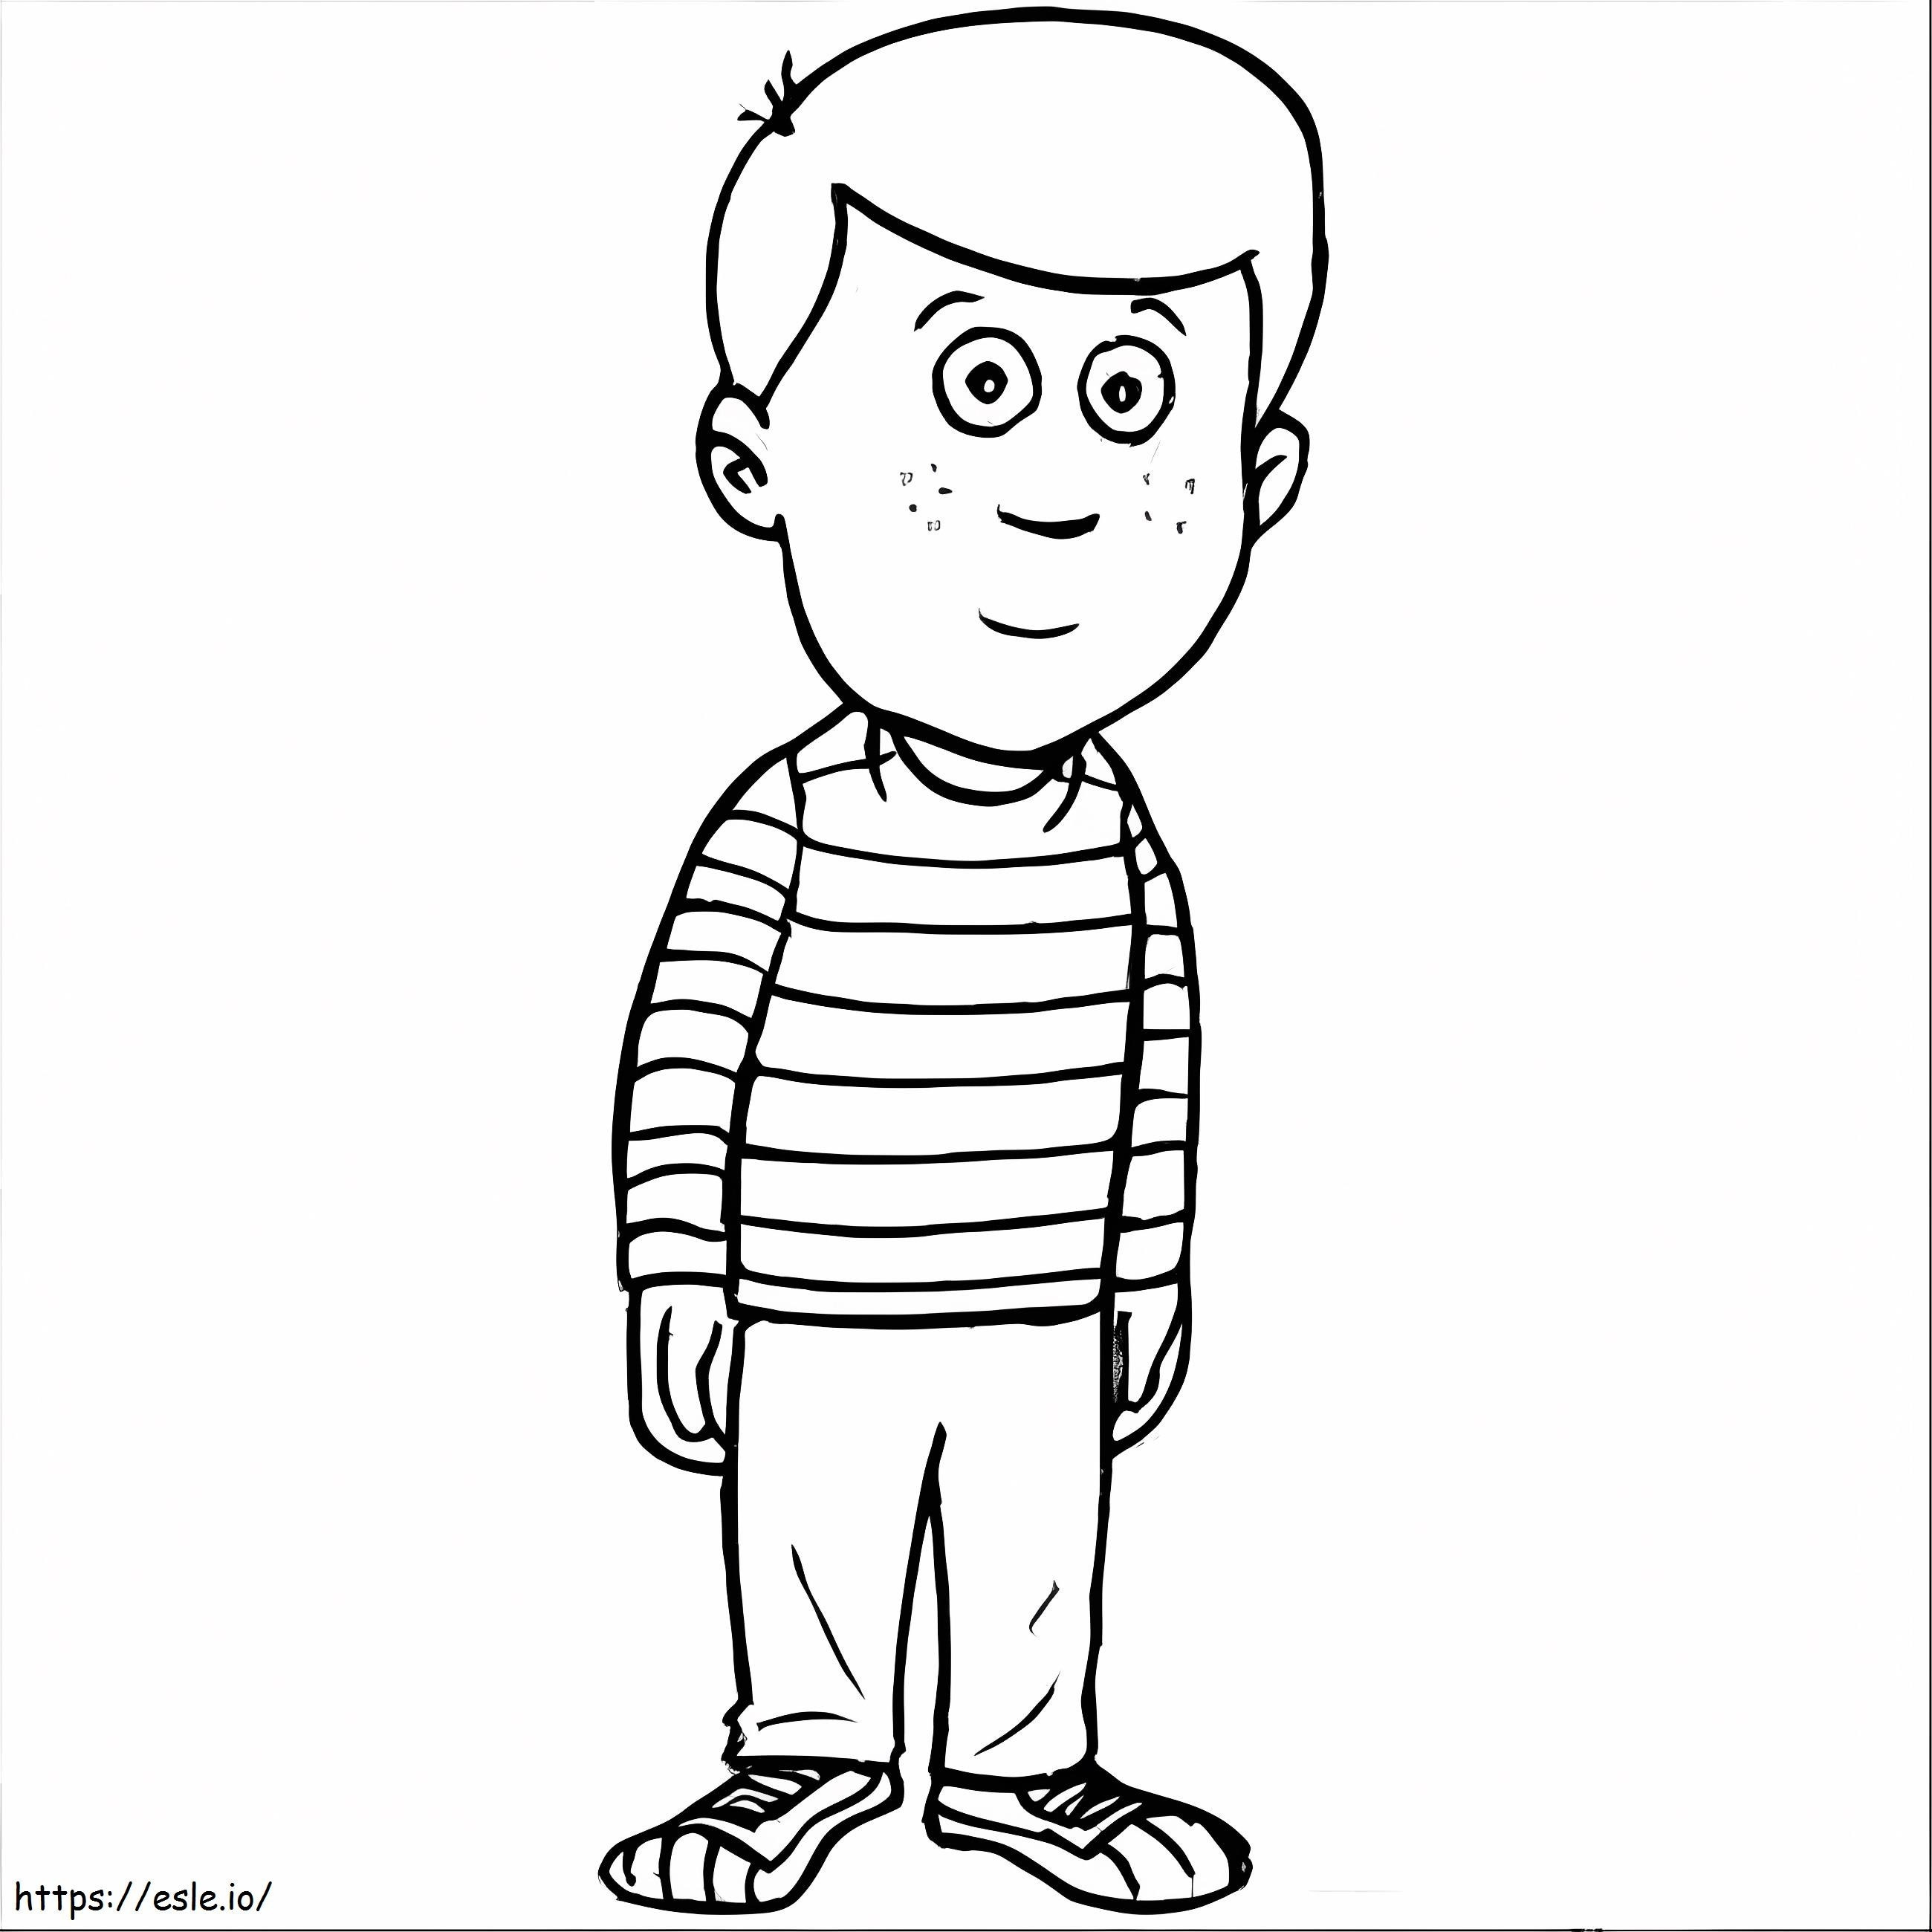 Standing Boy coloring page